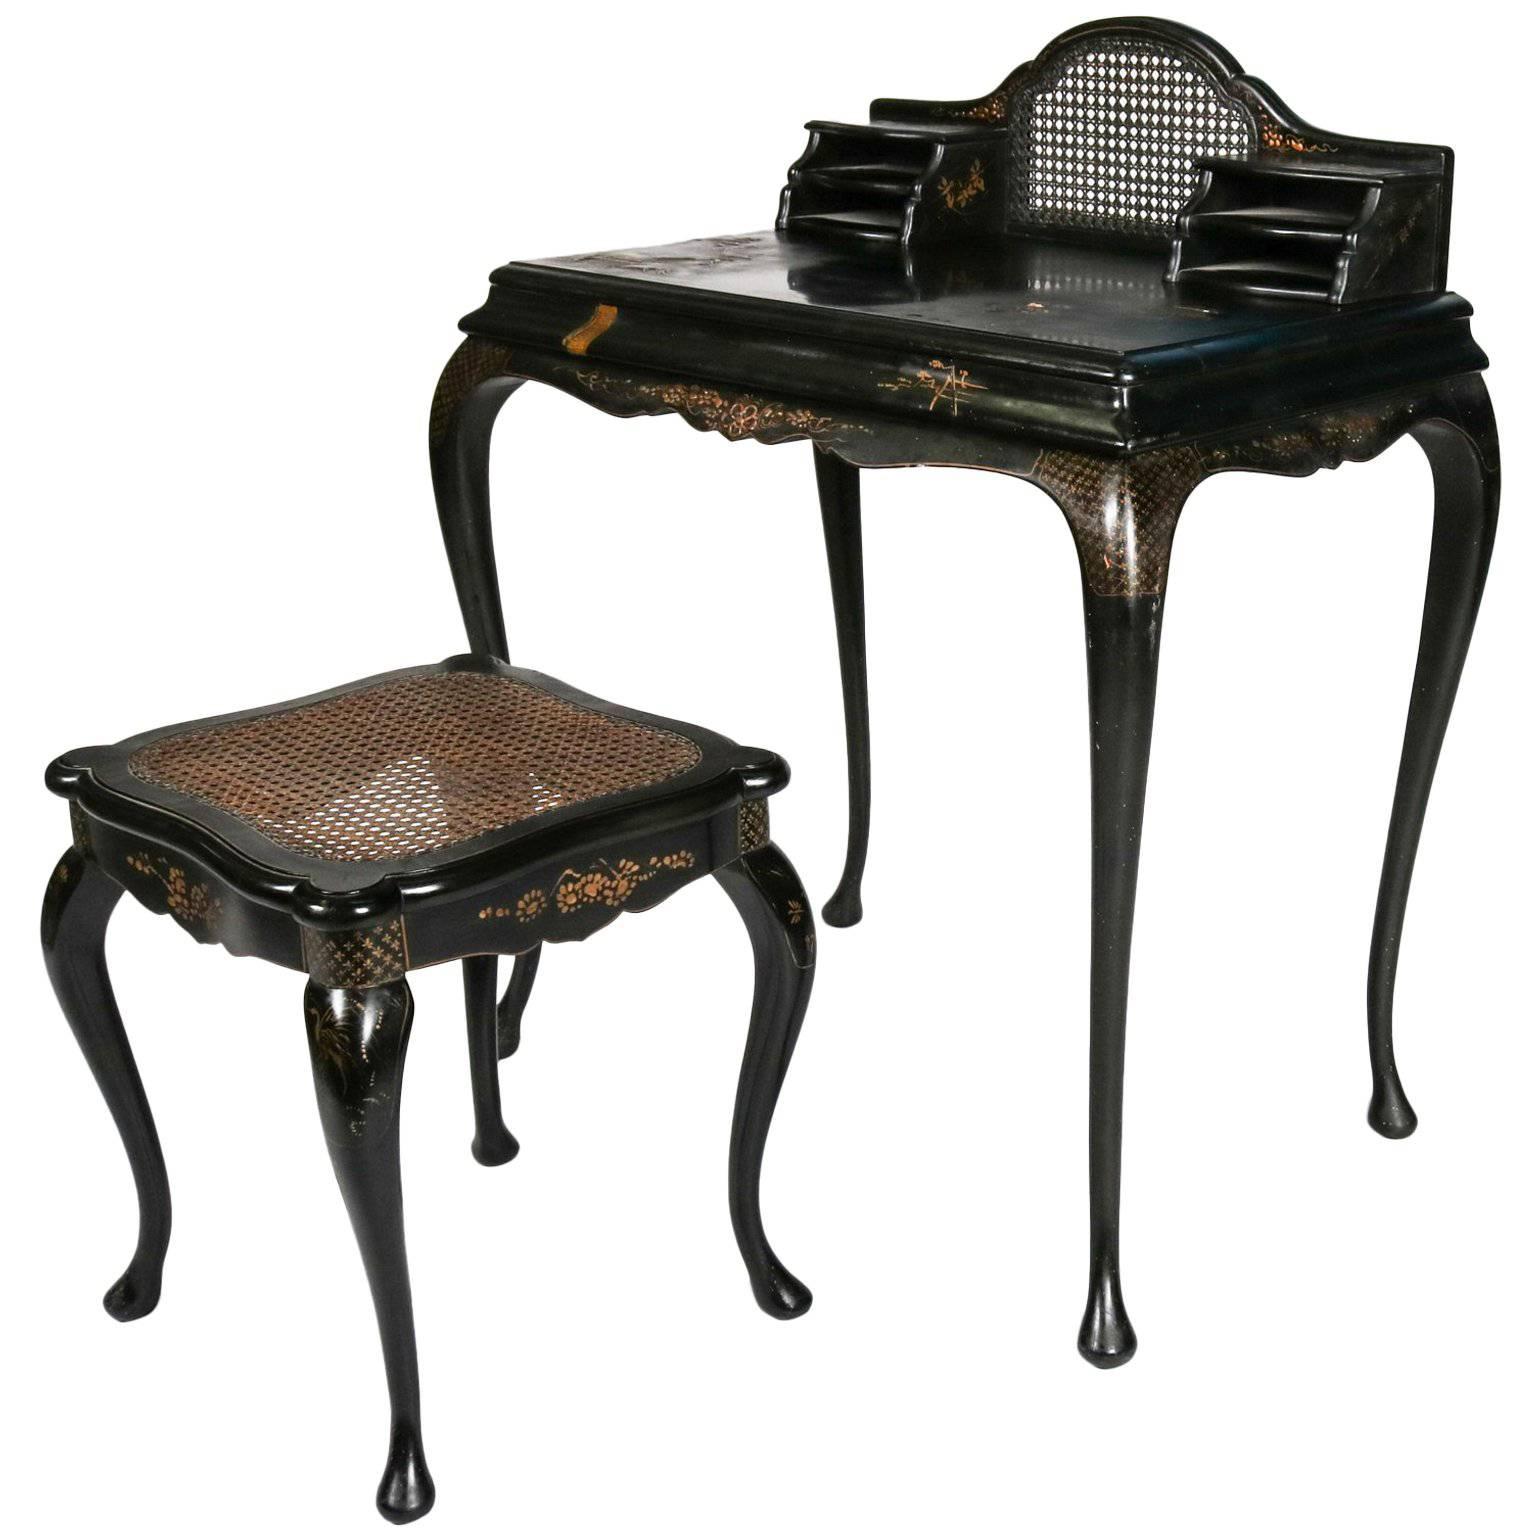 Antique Japanned Caned Black Lacquer Paint Decorated Desk & Stool, 19th Century